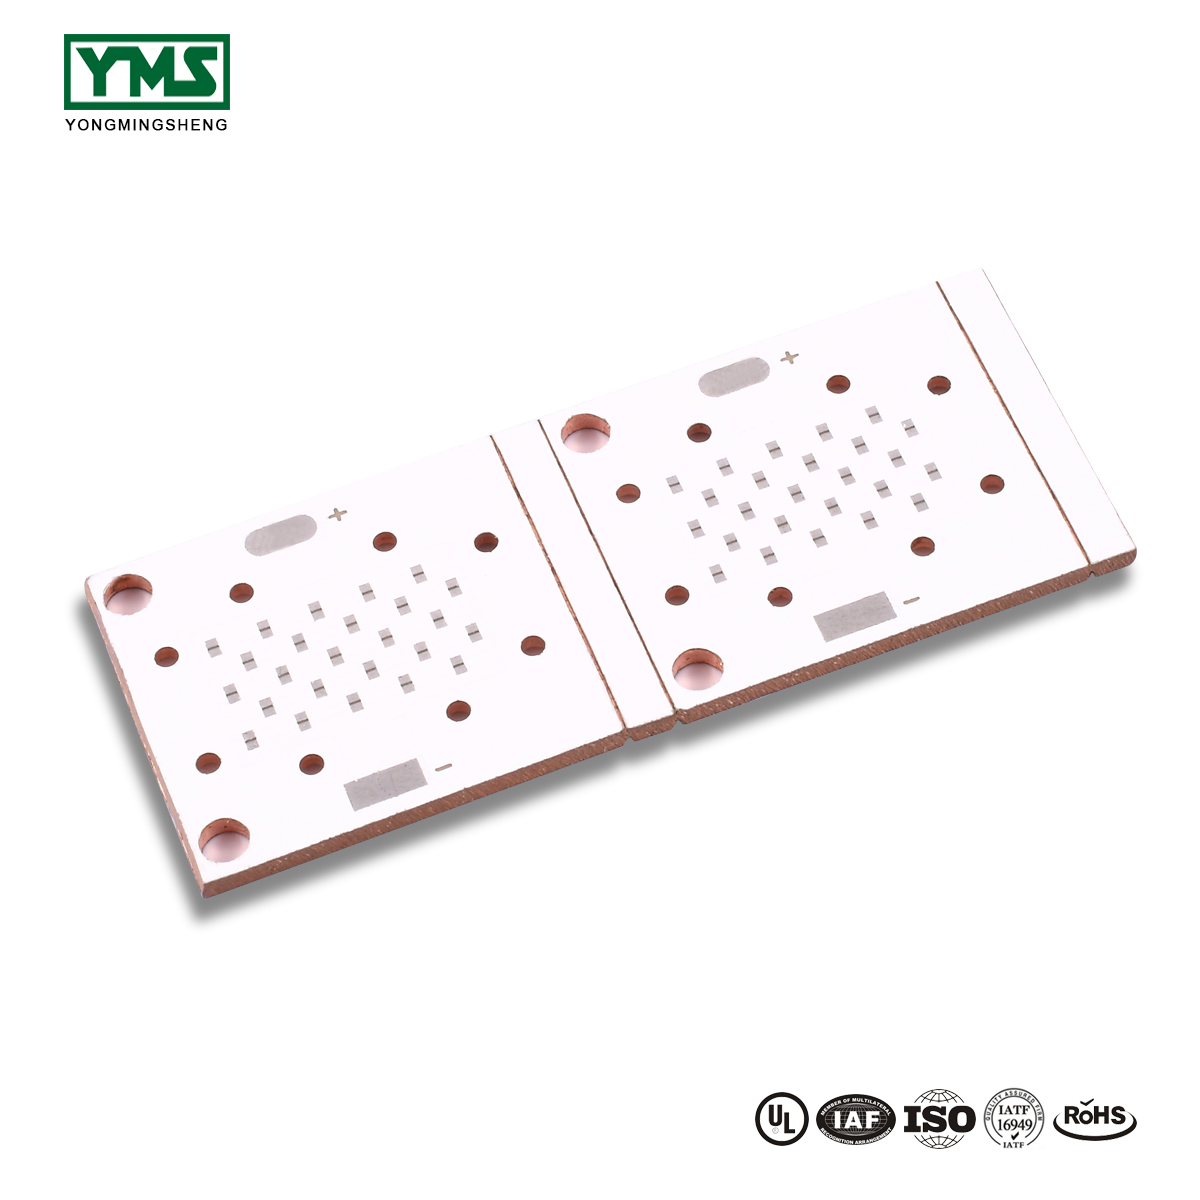 Factory directly Rigid-Flex Circuits - 1 Layer Thermoelectric Copper base Board | YMSPCB – Yongmingsheng